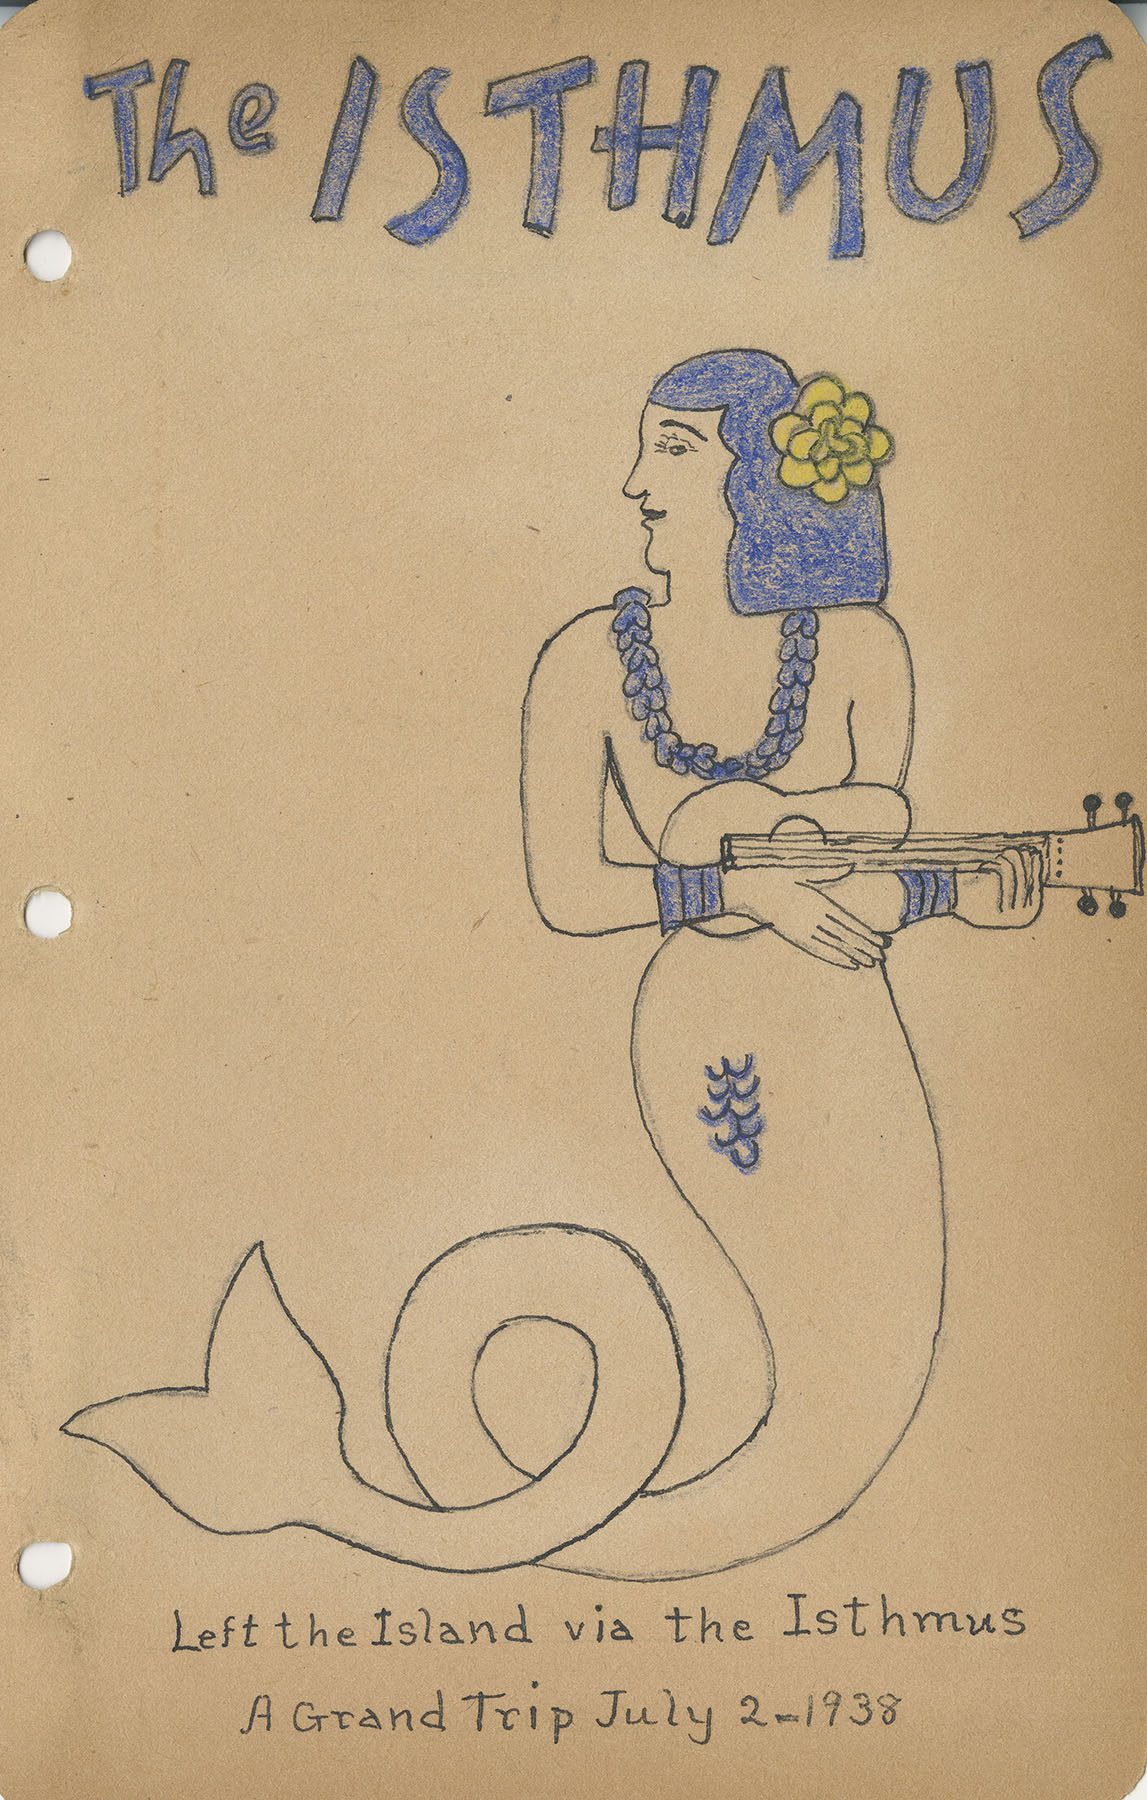 MC318: Drawing of a mermaid captioned "Left the island via the Isthmus. A Grand Trip July 2, 1938."